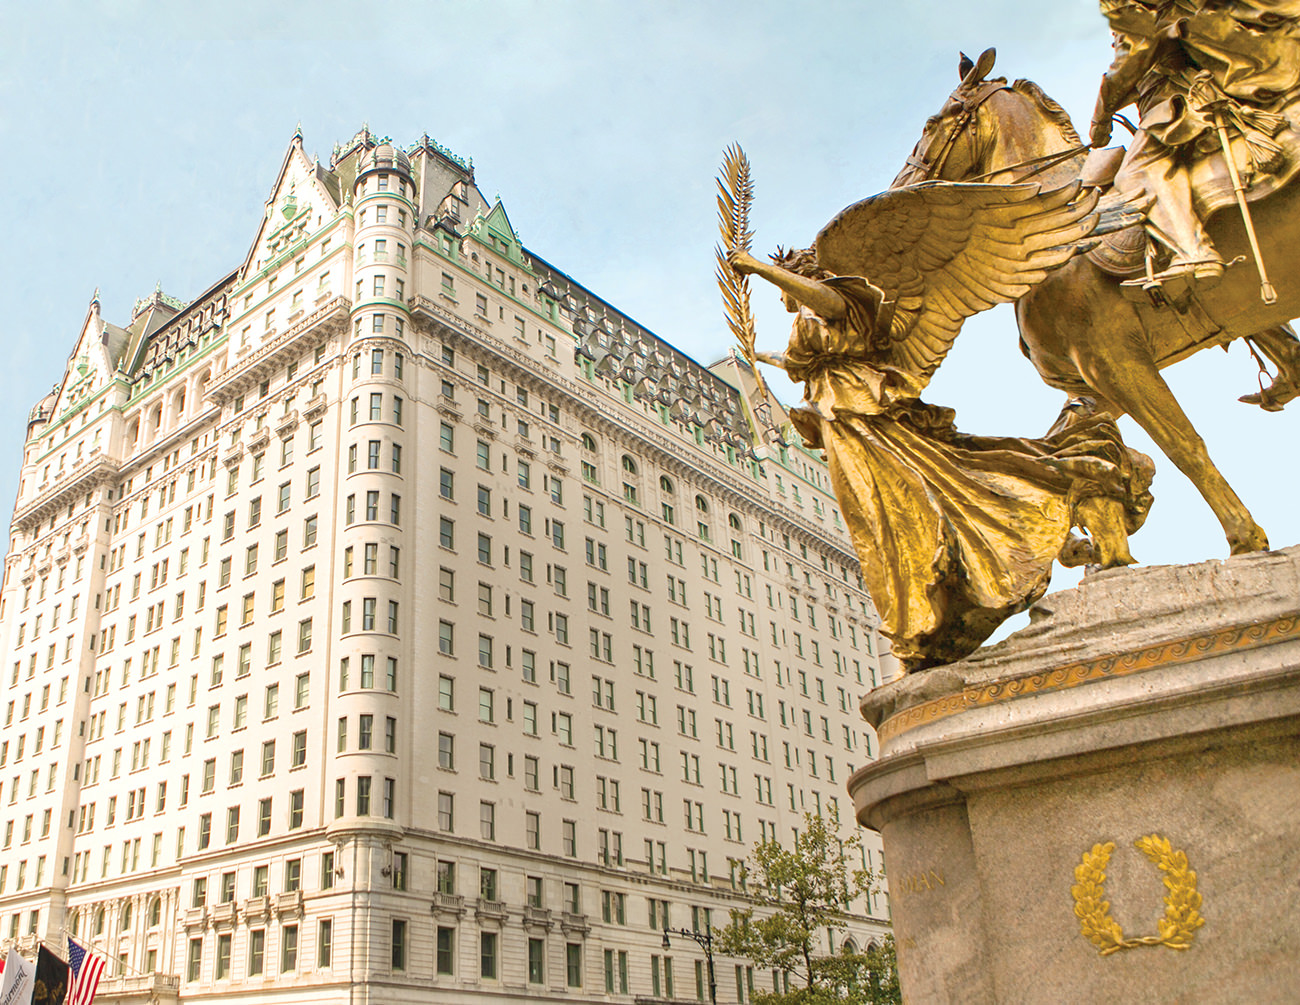 plaza york hotel city hotels most themilliardaire sought destination lifestyle after